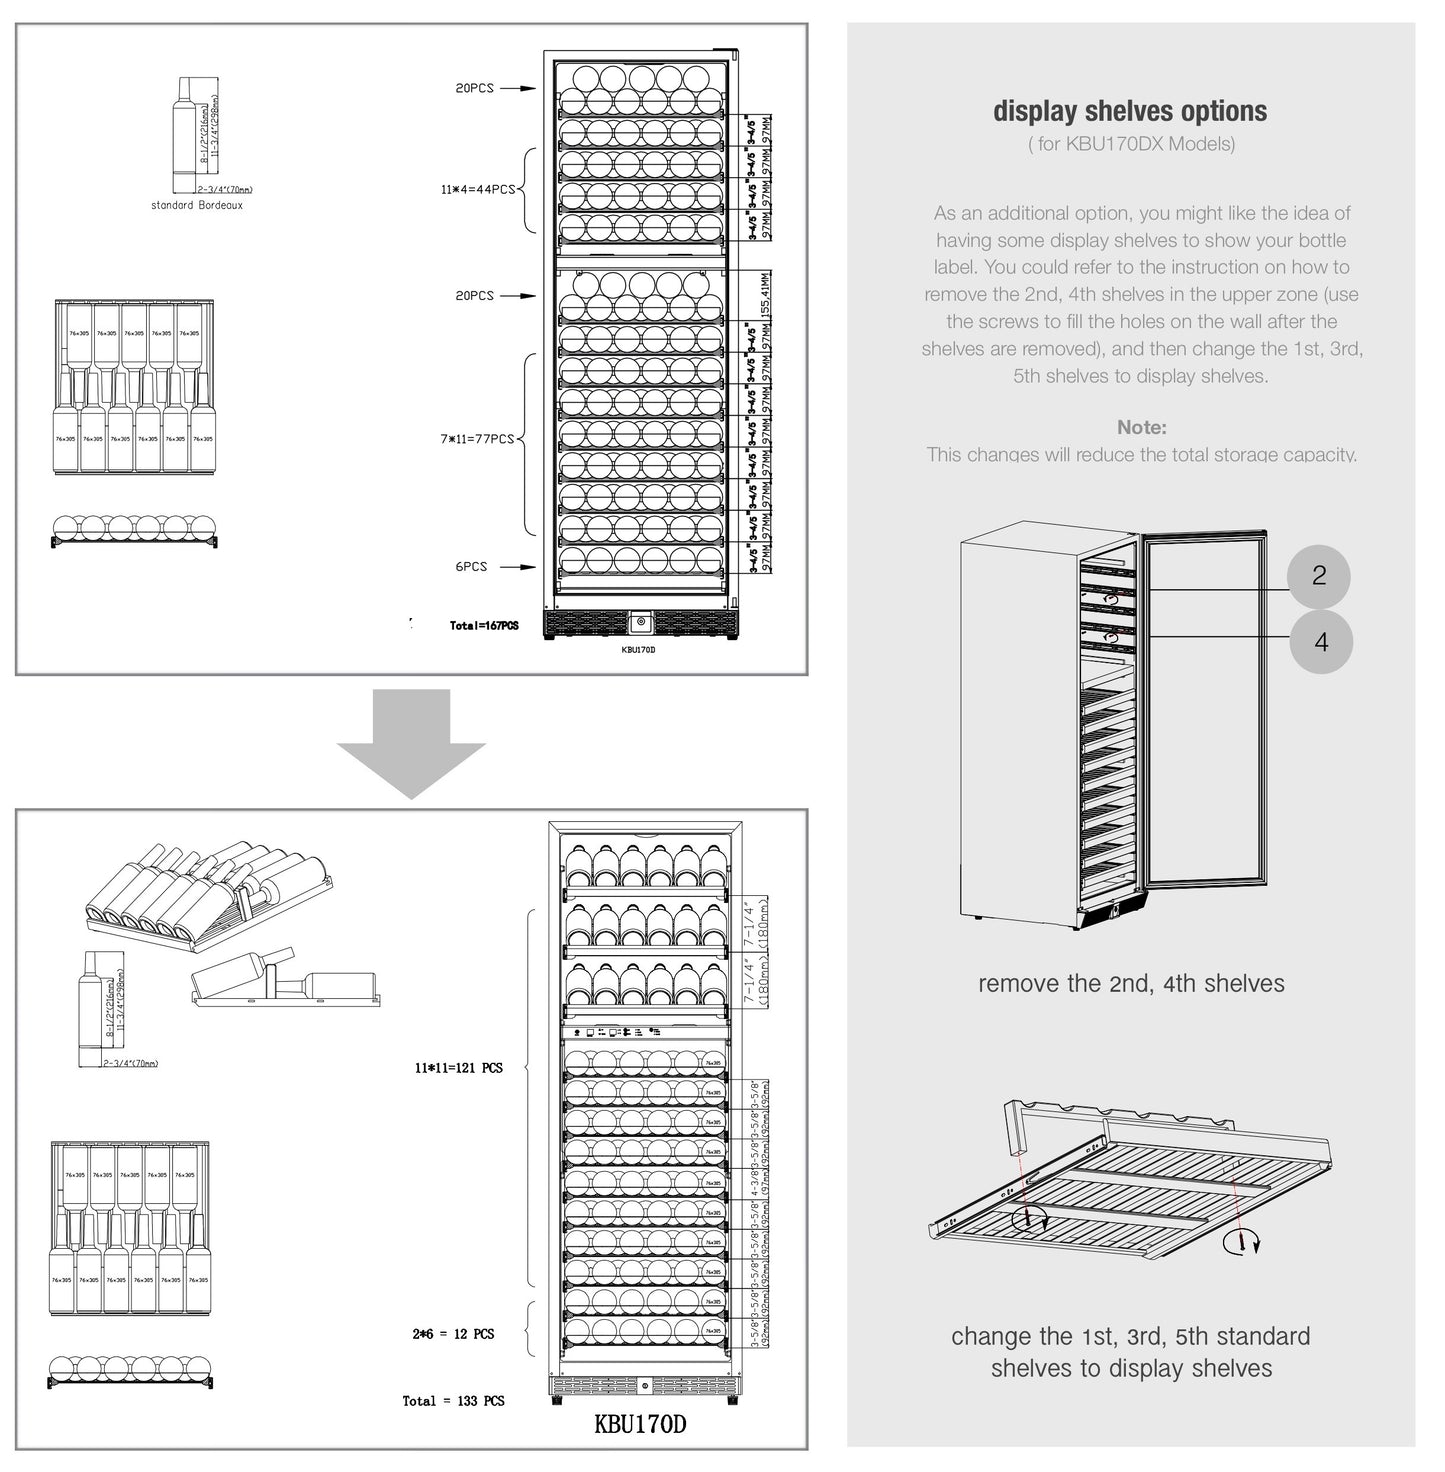 A diagram of a wine rack with a refrigerator and wine bottles inside.